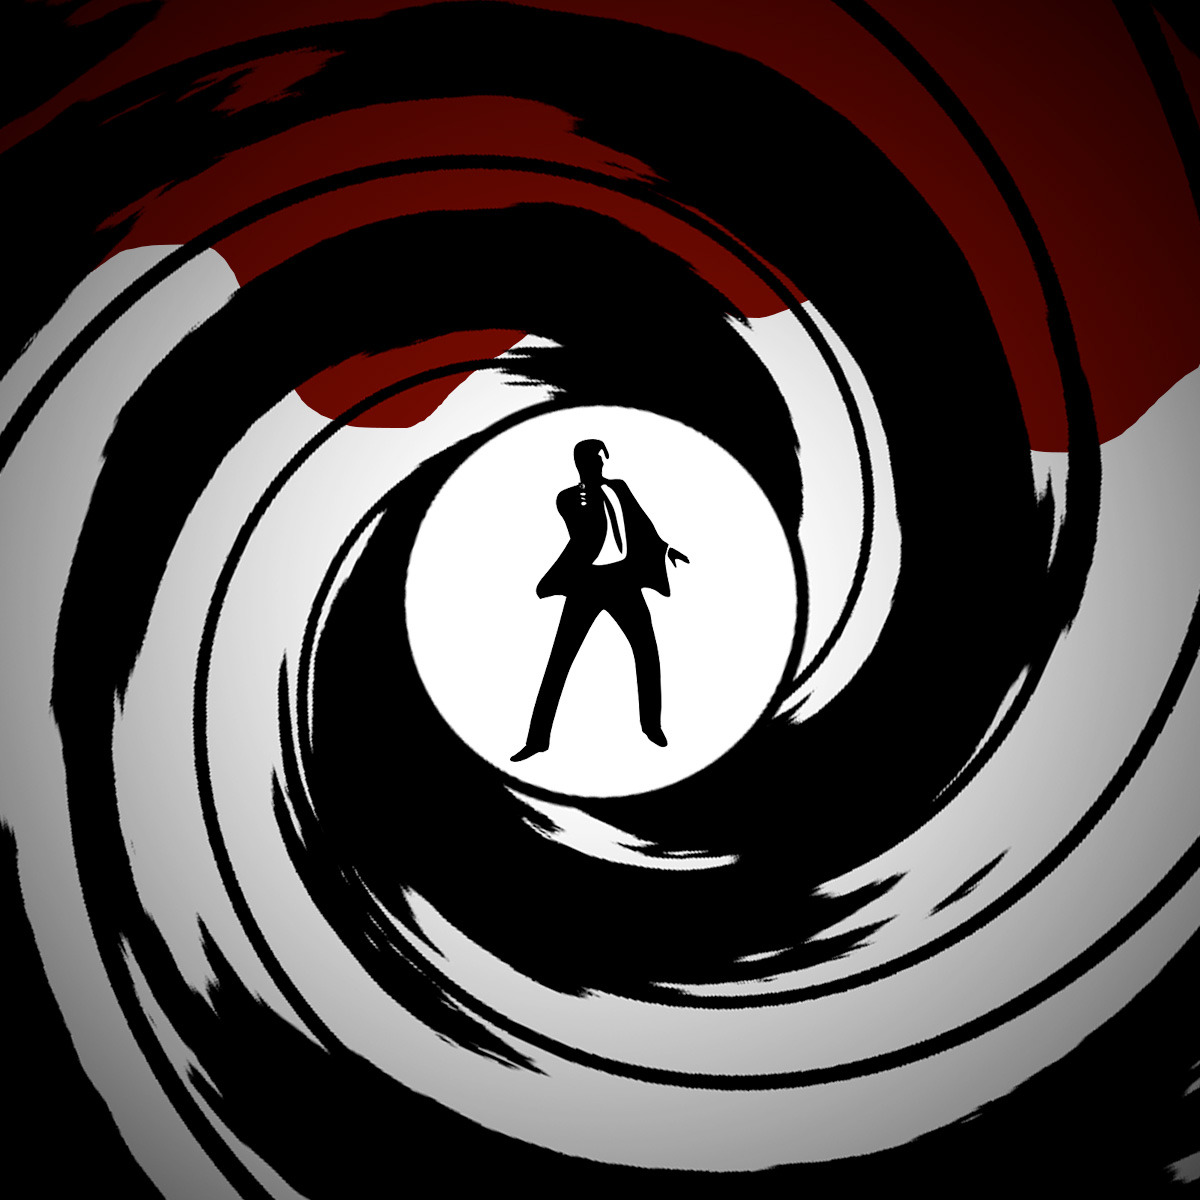 james bond 007 wallpaper,circle,photography,black and white,graphic design,graphics